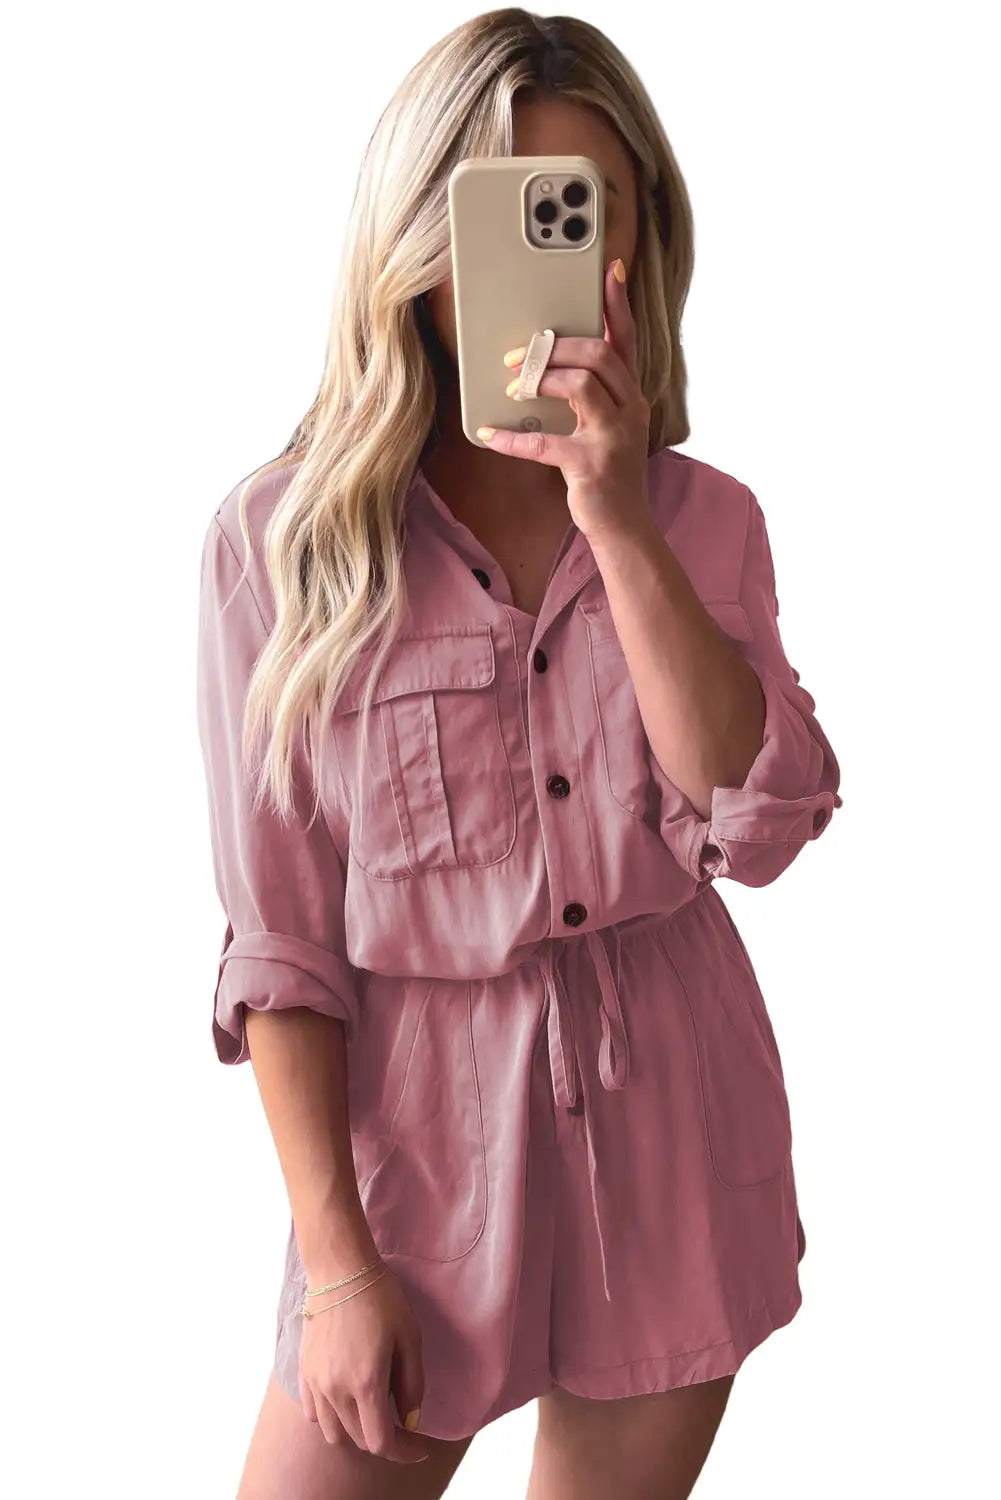 Peach blossom roll up sleeve flap pockets drawstring playsuit - jumpsuits & rompers